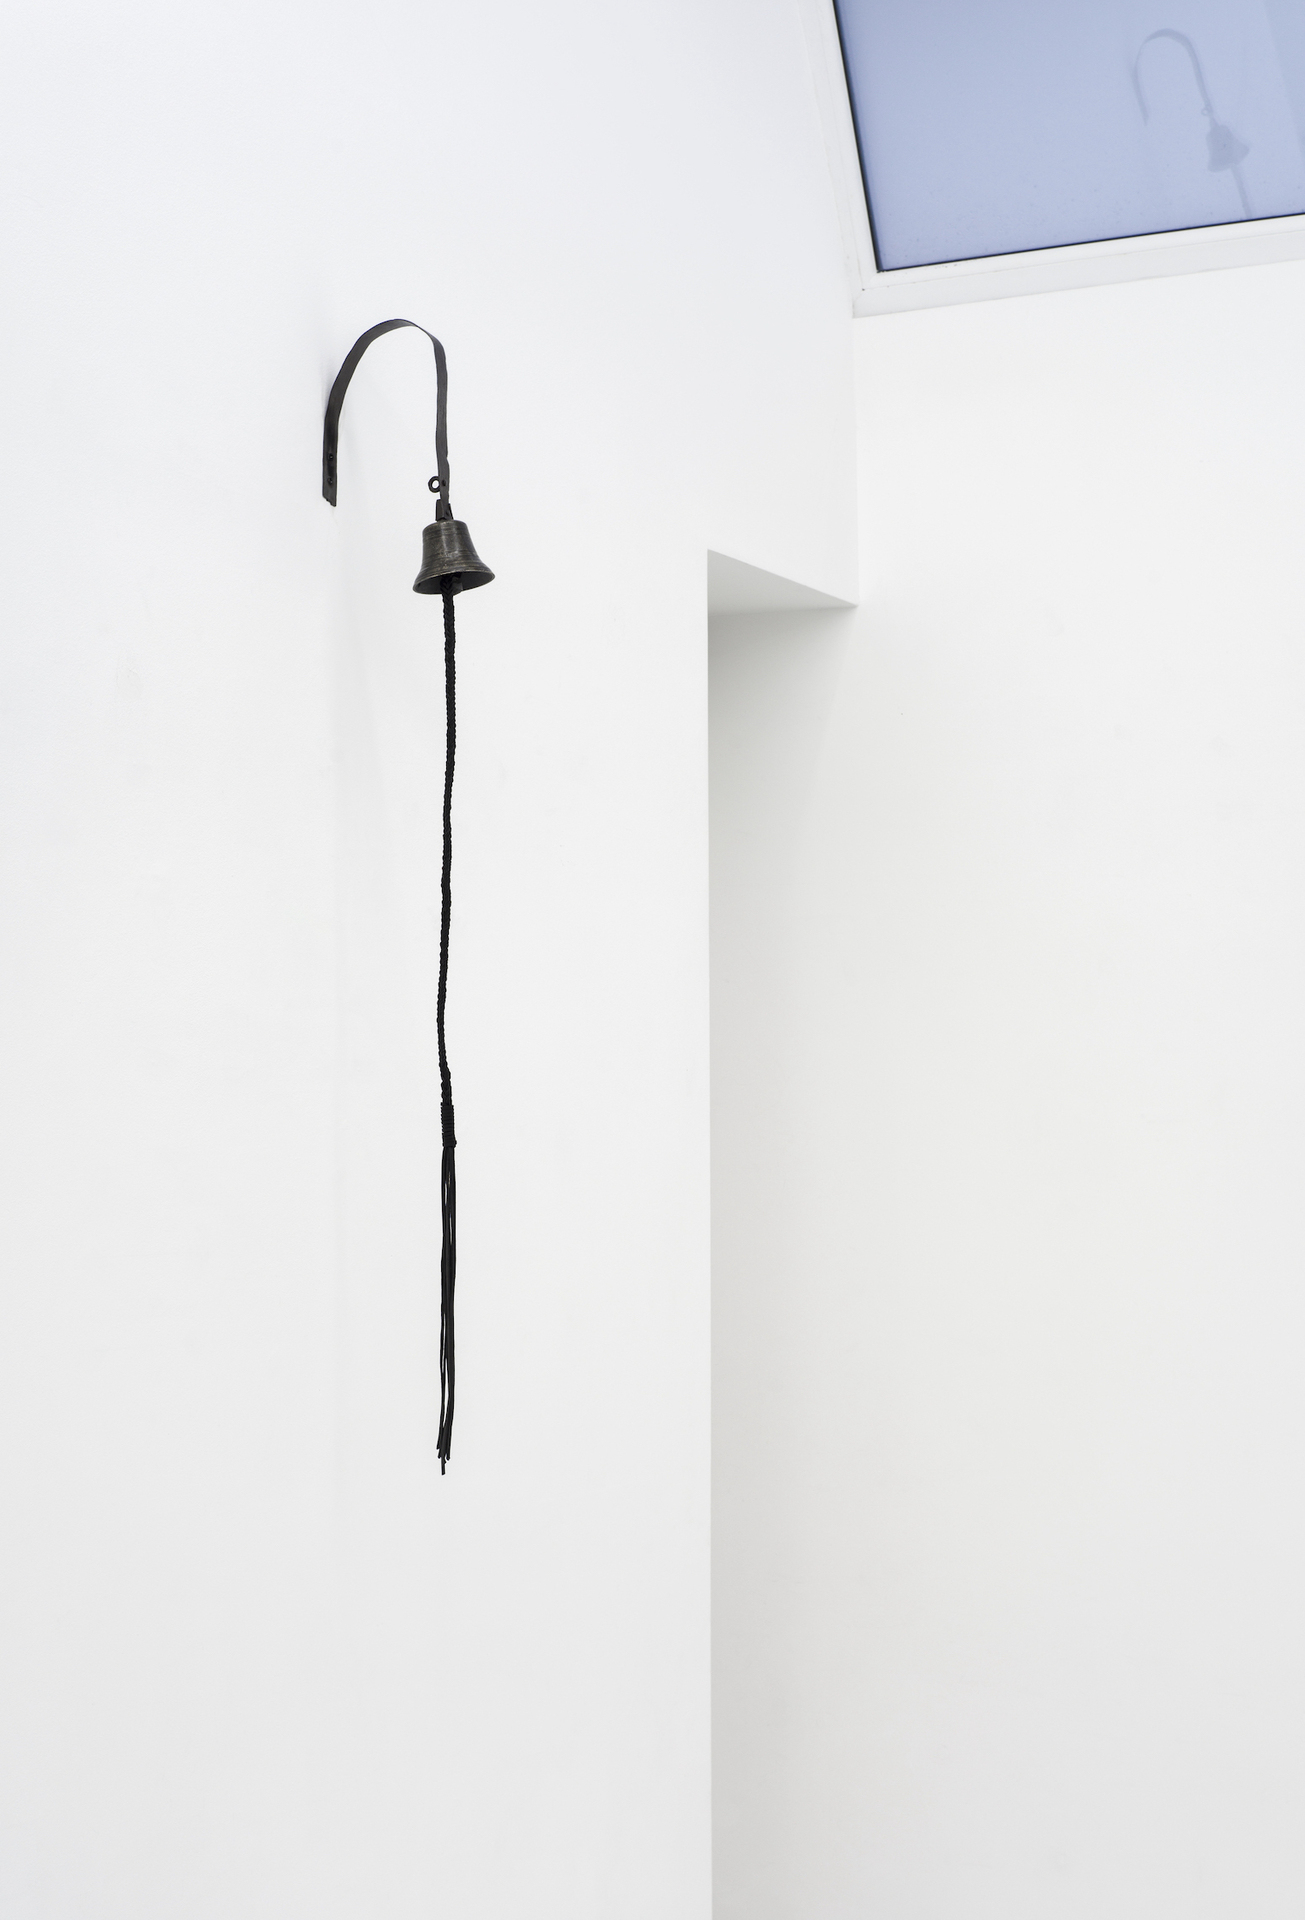 Eliza Ballesteros, Domestic Heck V (strap), antique brass bell, iron, leather laces, 140 x 12 cm, 2021